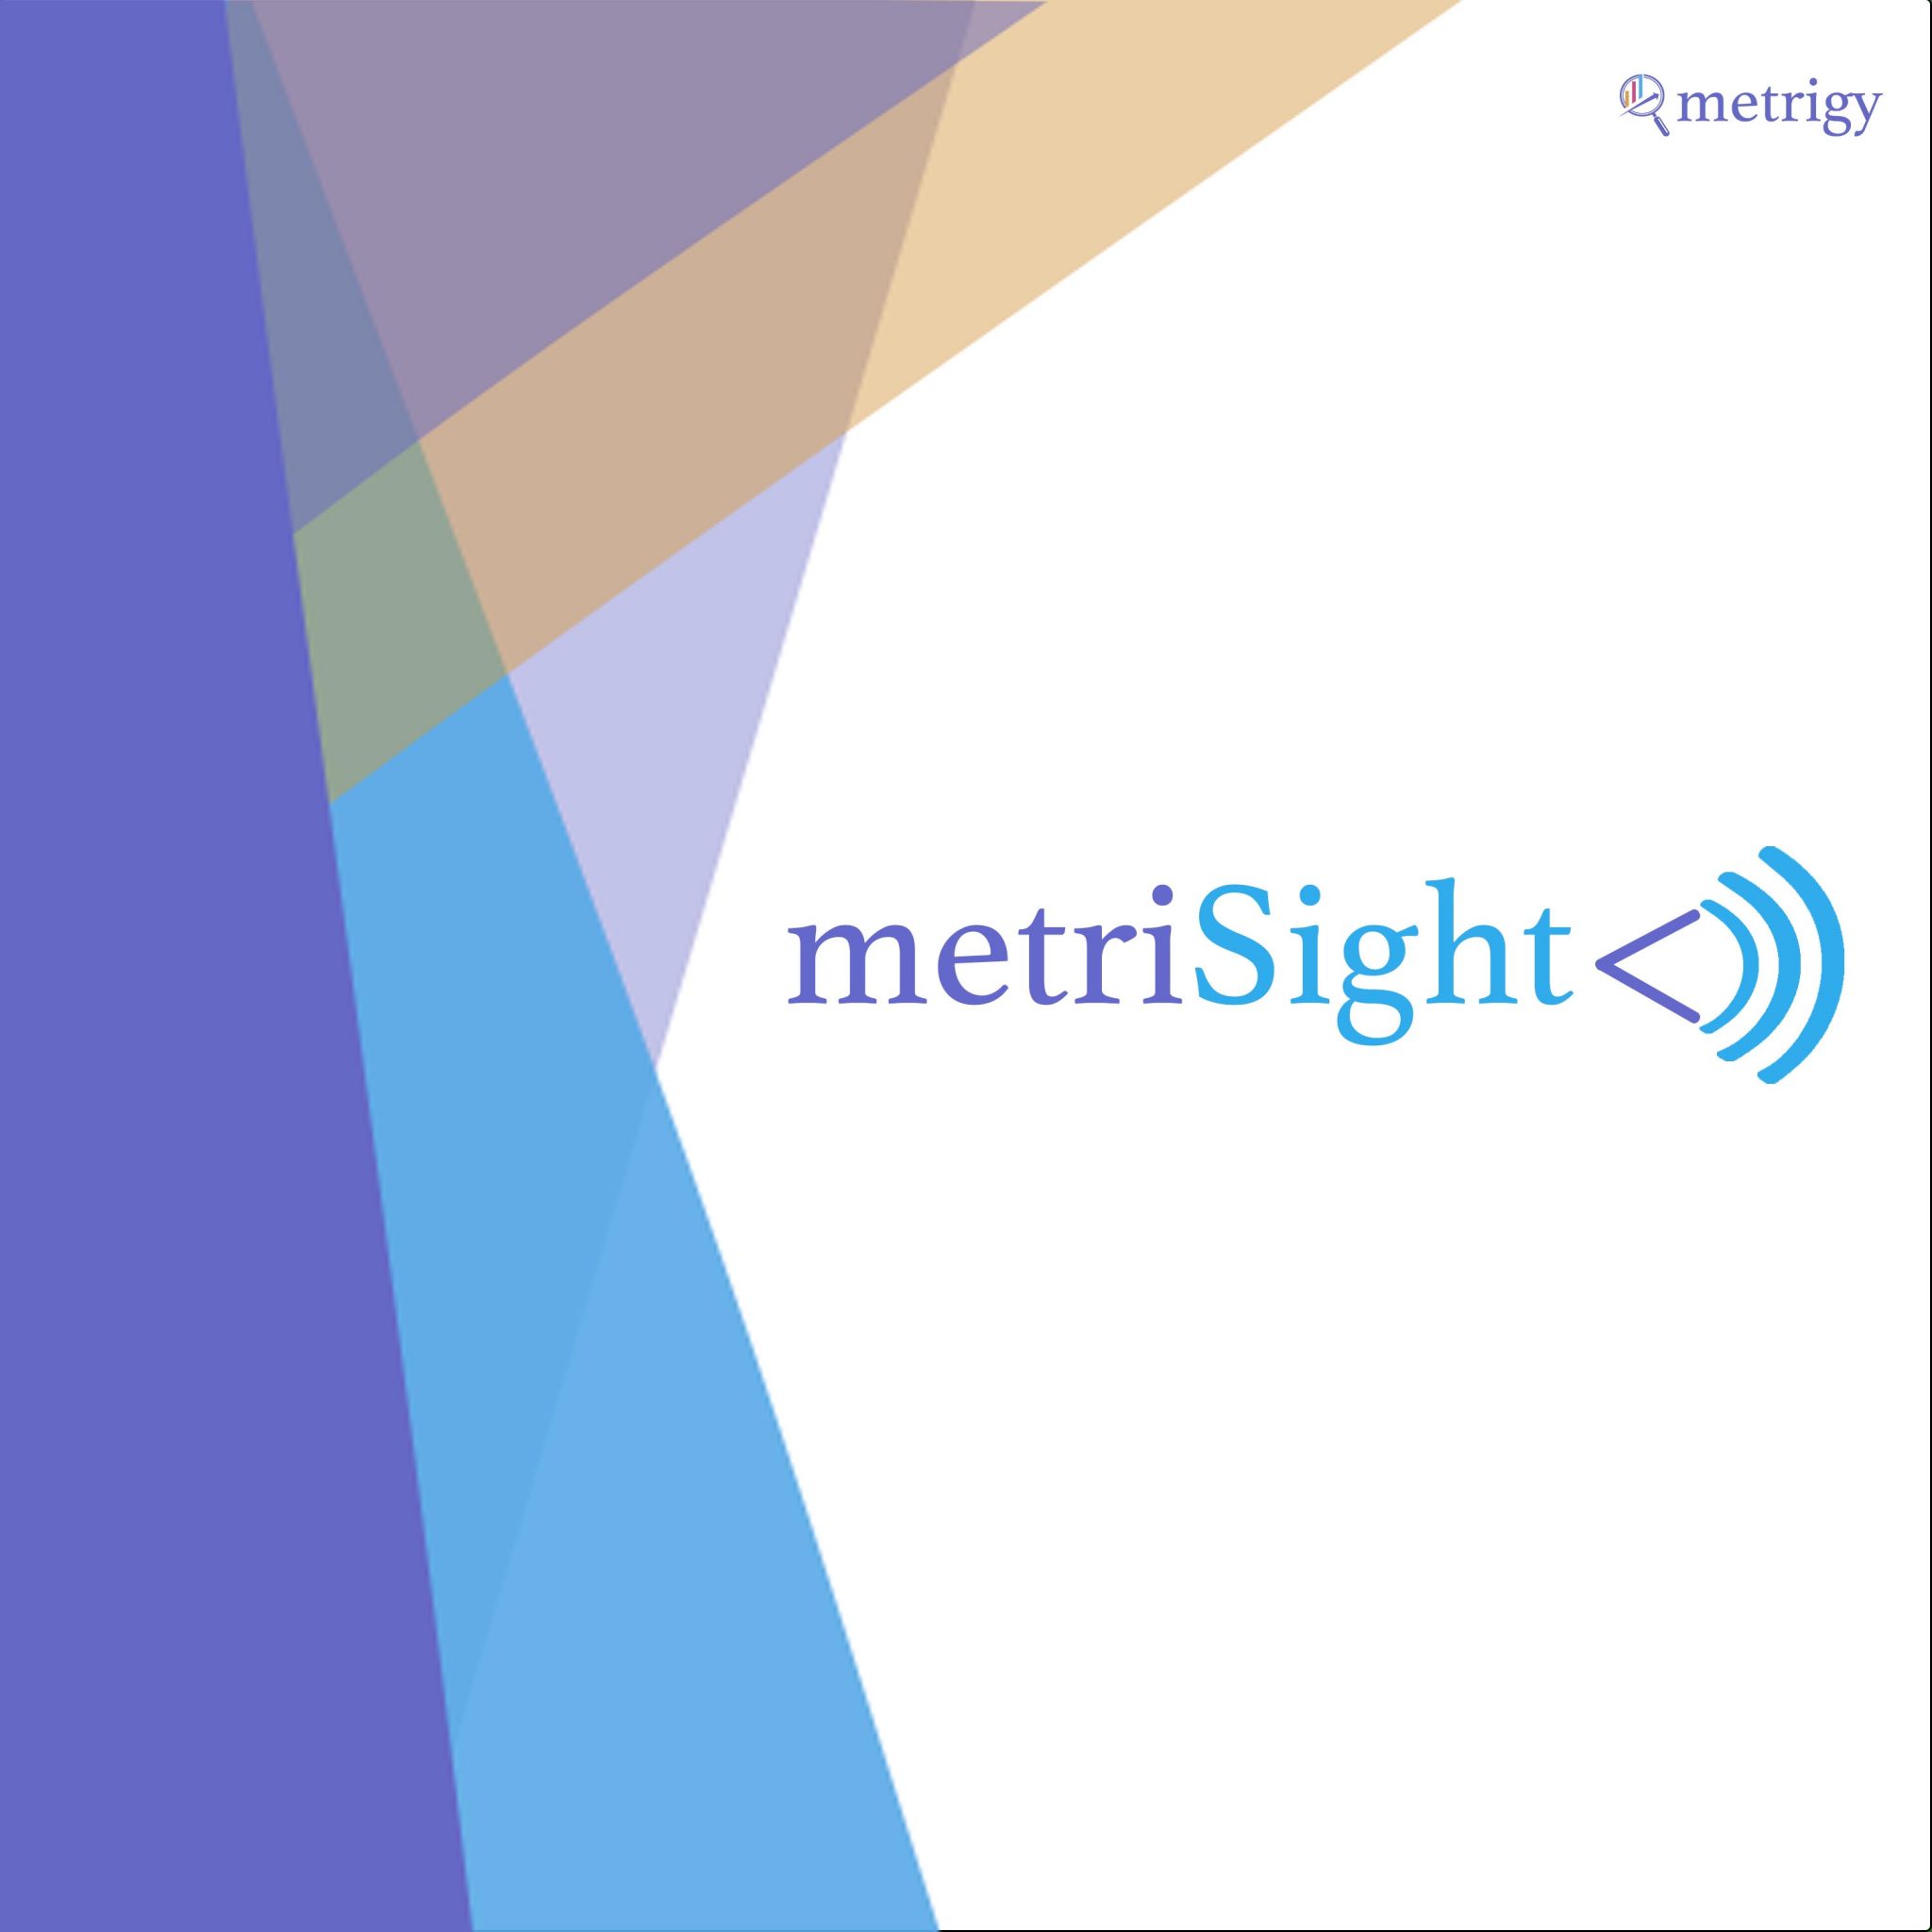 MetriSight - What's What with Latest UC Earnings